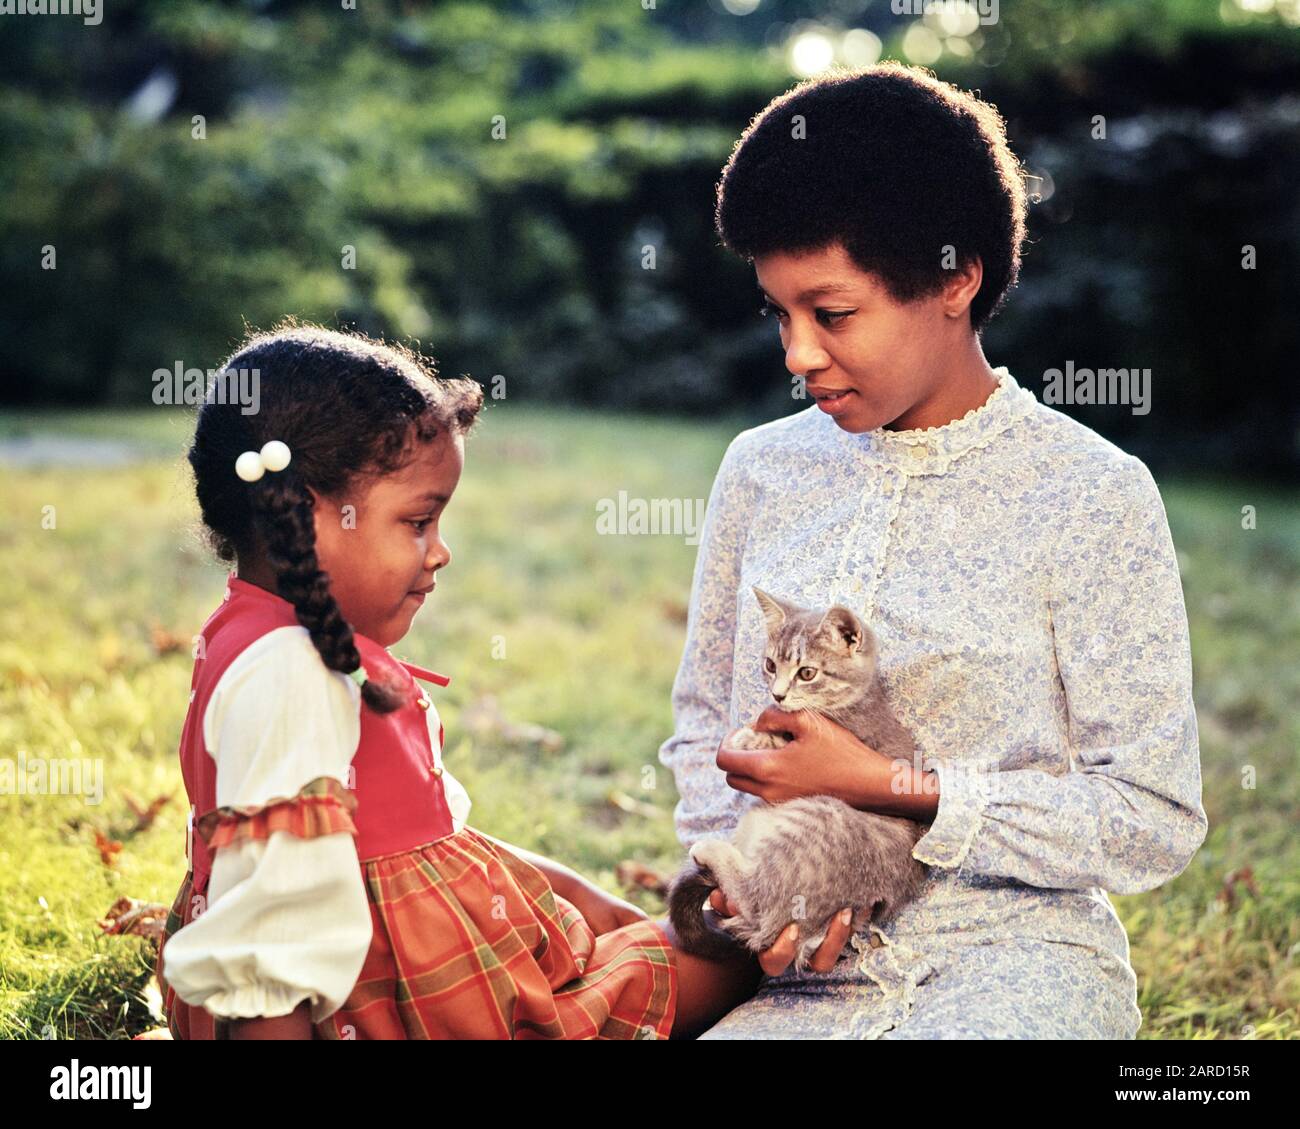 1970s 1960s MOTHER AND DAUGHTER IN BACKYARD MOTHER HOLDING A TABBY KITTEN - kc8178 PHT001 HARS JUVENILE CATS COMMUNICATION YOUNG ADULT PEACE TEAMWORK STRONG JOY LIFESTYLE FEMALES RURAL HOME LIFE HALF-LENGTH LADIES DAUGHTERS PERSONS INSPIRATION CARING PETS CONFIDENCE TABBY HAPPINESS MAMMALS STRENGTH AFRICAN-AMERICANS AFRICAN-AMERICAN AND FELINE BLACK ETHNICITY AUTHORITY CONNECTION STYLISH FELINES PERSONAL ATTACHMENT AFFECTION EMOTION JUVENILES KITTY MAMMAL MOMS RELAXATION TOGETHERNESS YOUNG ADULT WOMAN OLD FASHIONED AFRICAN AMERICANS Stock Photo